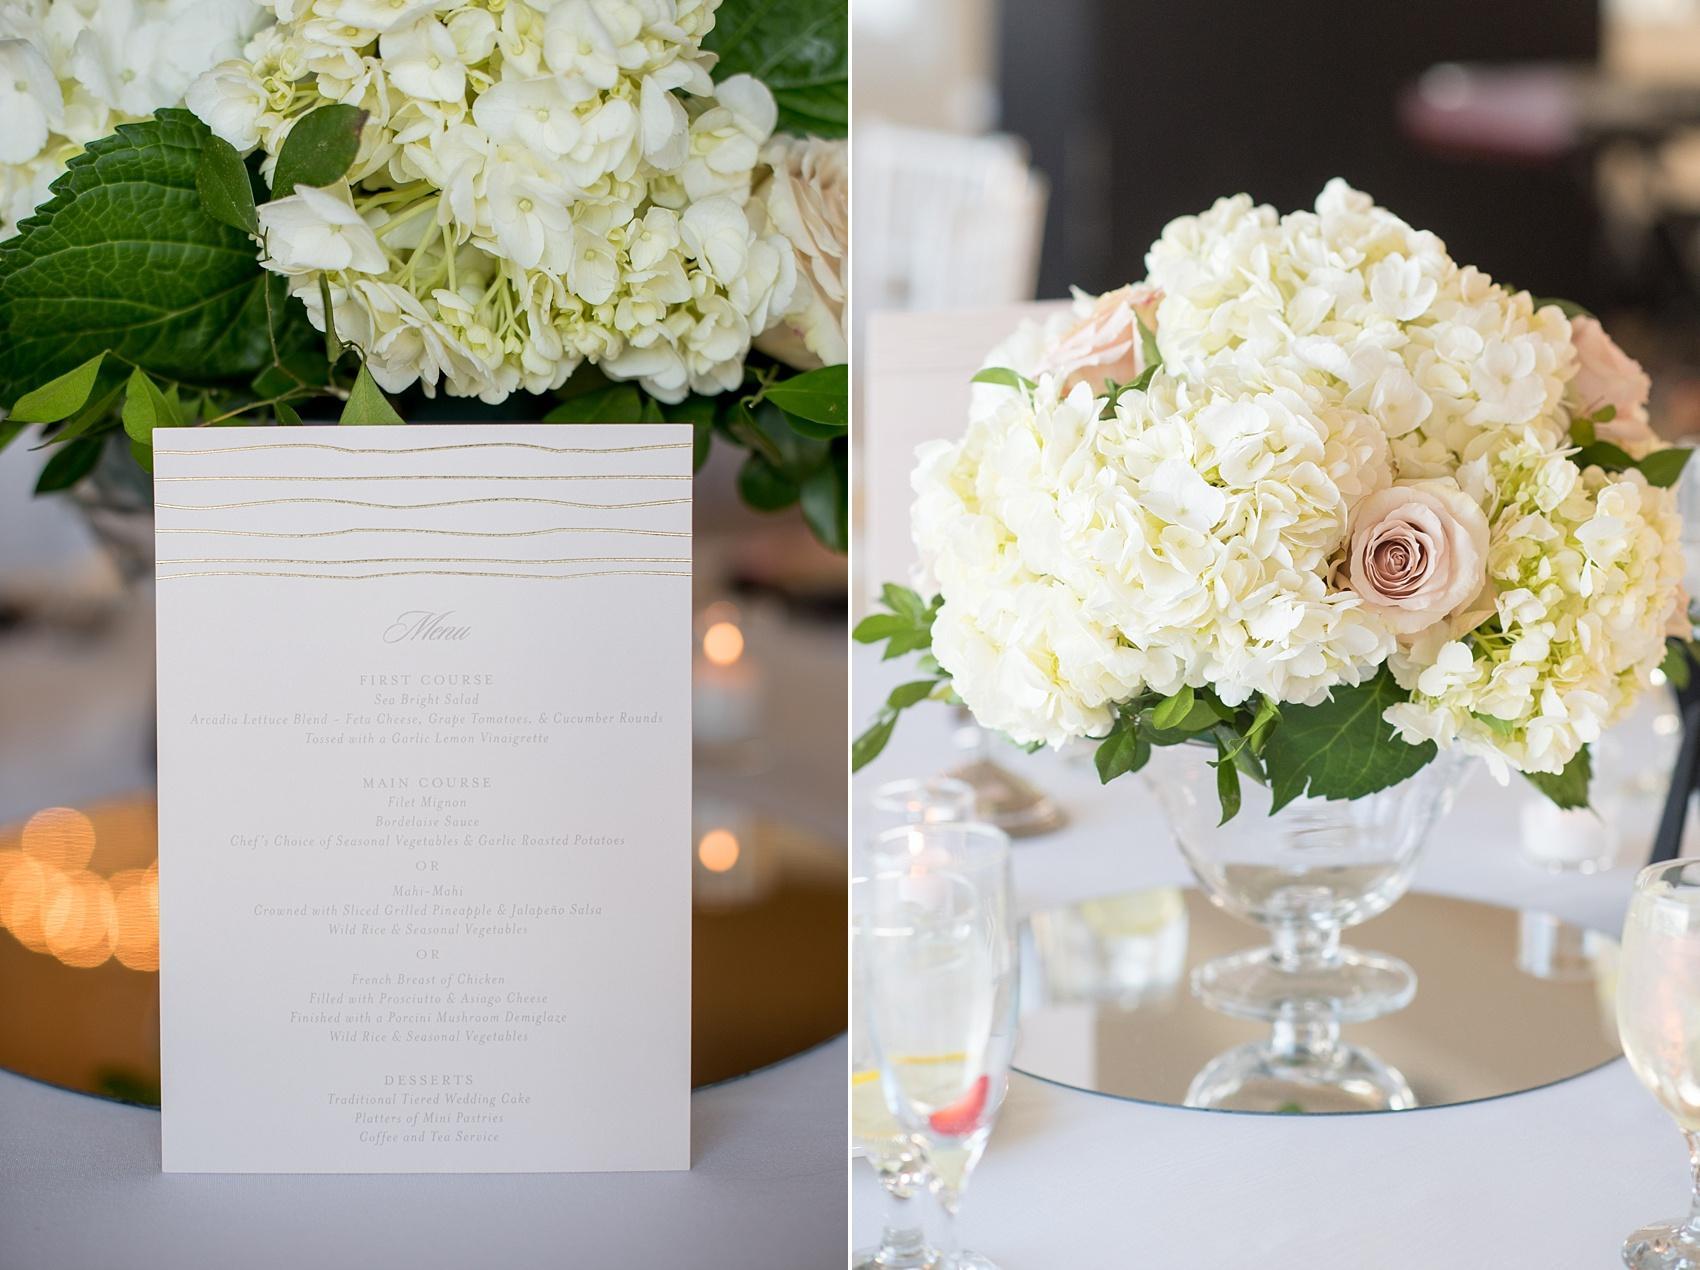 Photo by Mikkel Paige photography. Wedding at Windows on the Water, NJ with hydrangea and rose centerpieces and blush pink and gold menus.